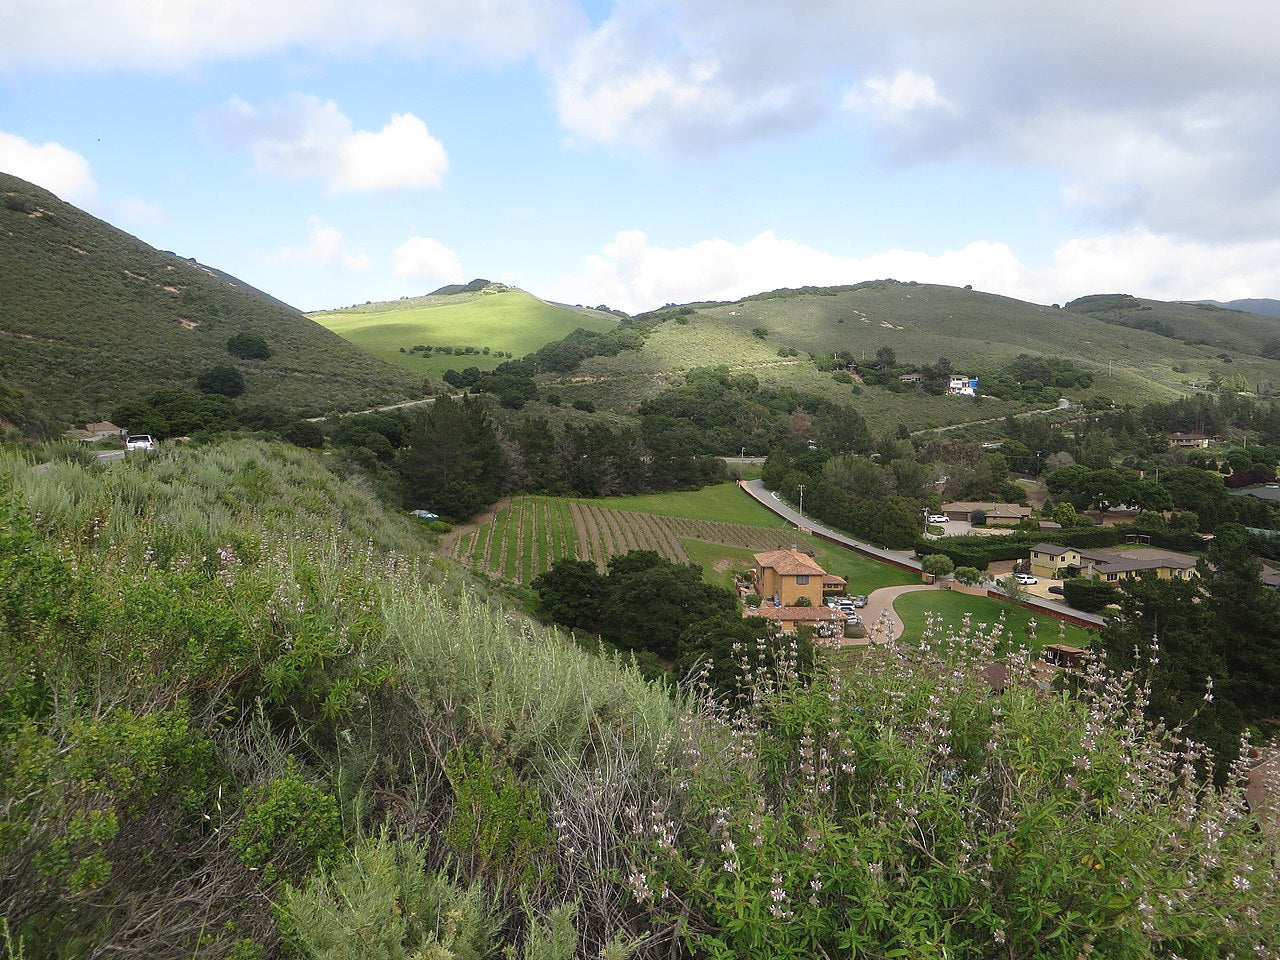 Haus and Hues in Carmel Valley Village